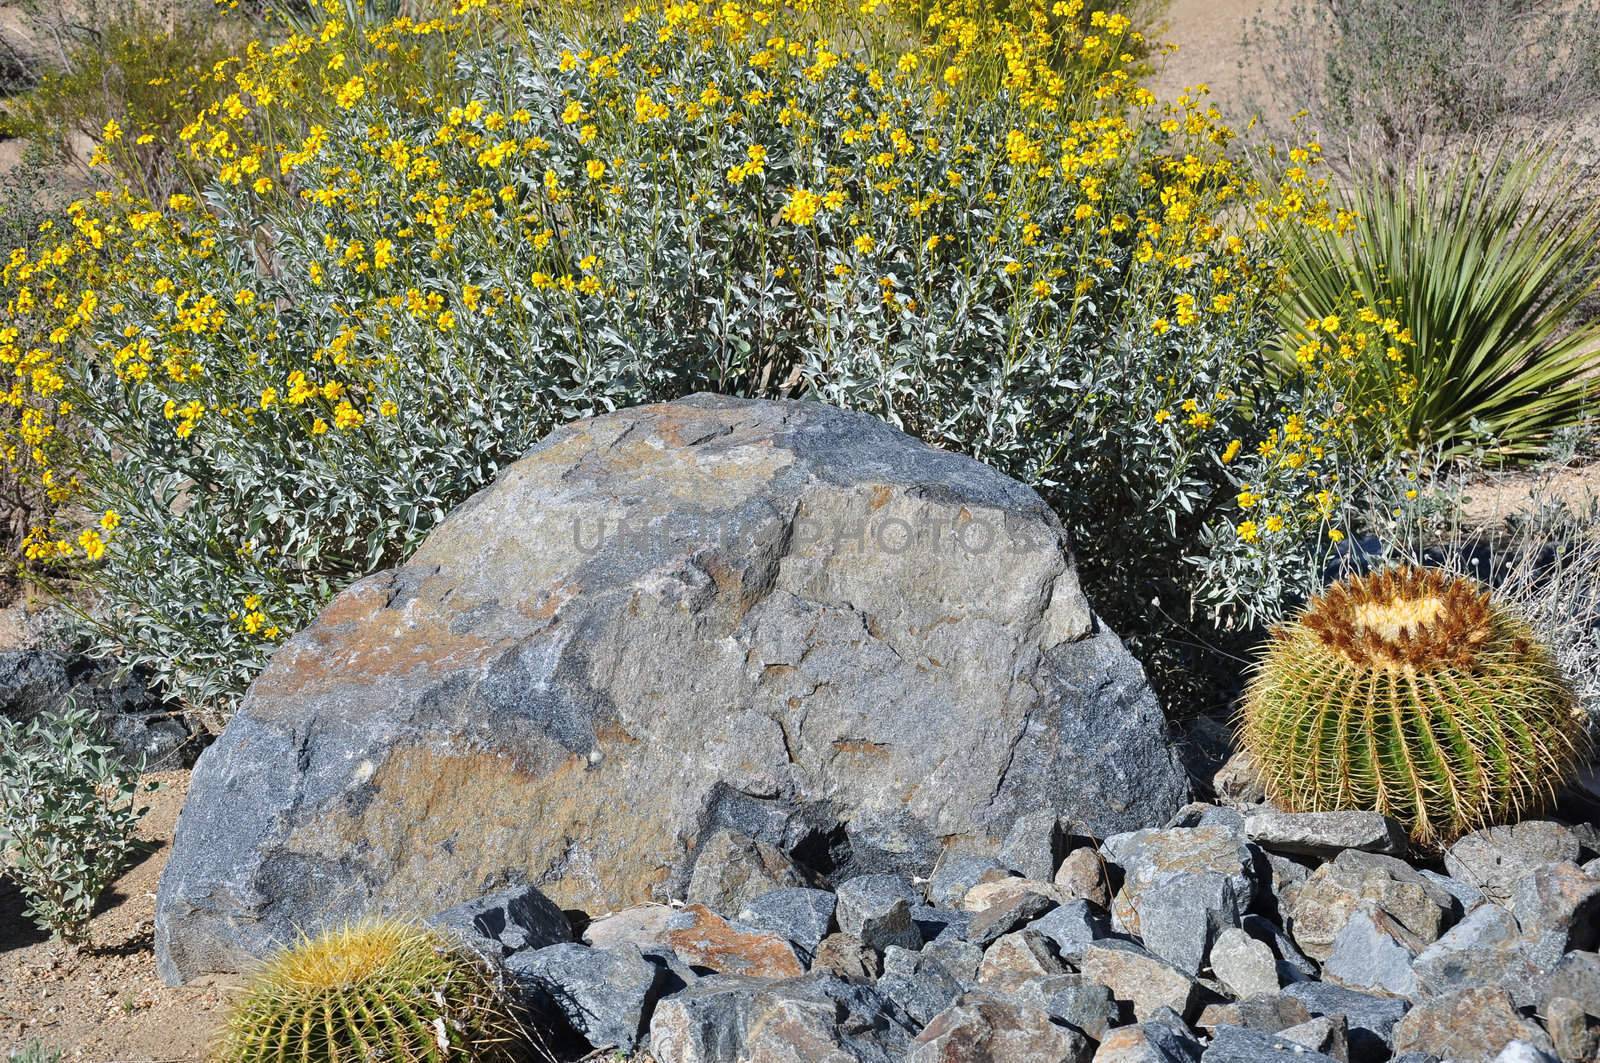 Different sized rocks mix with cactus and yellow wildflowers in Palm Desert, California.